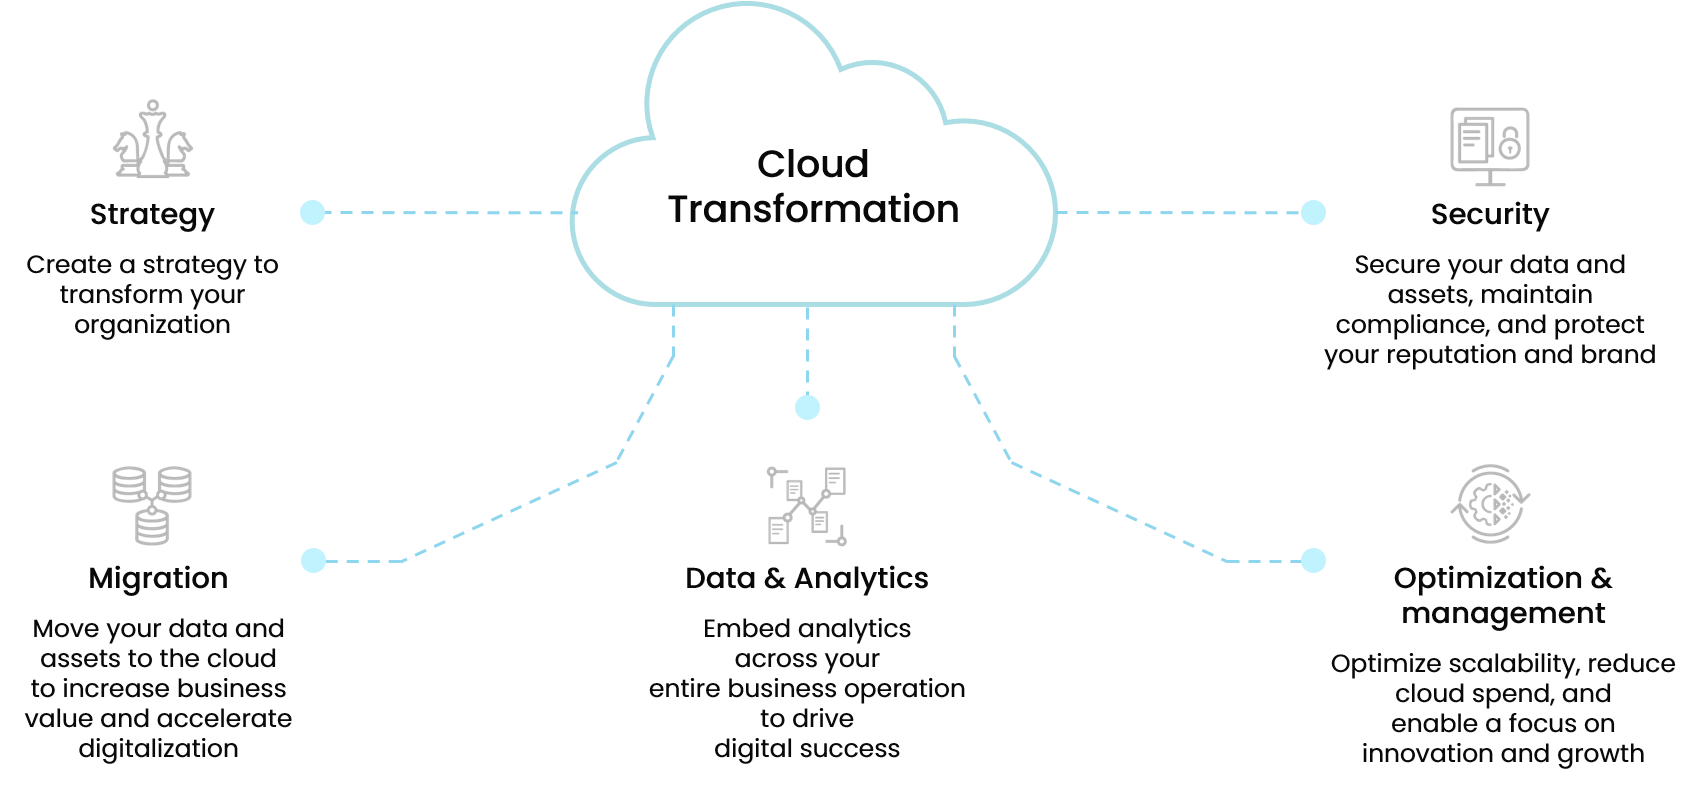 Trianz chart showing the components of cloud transformation